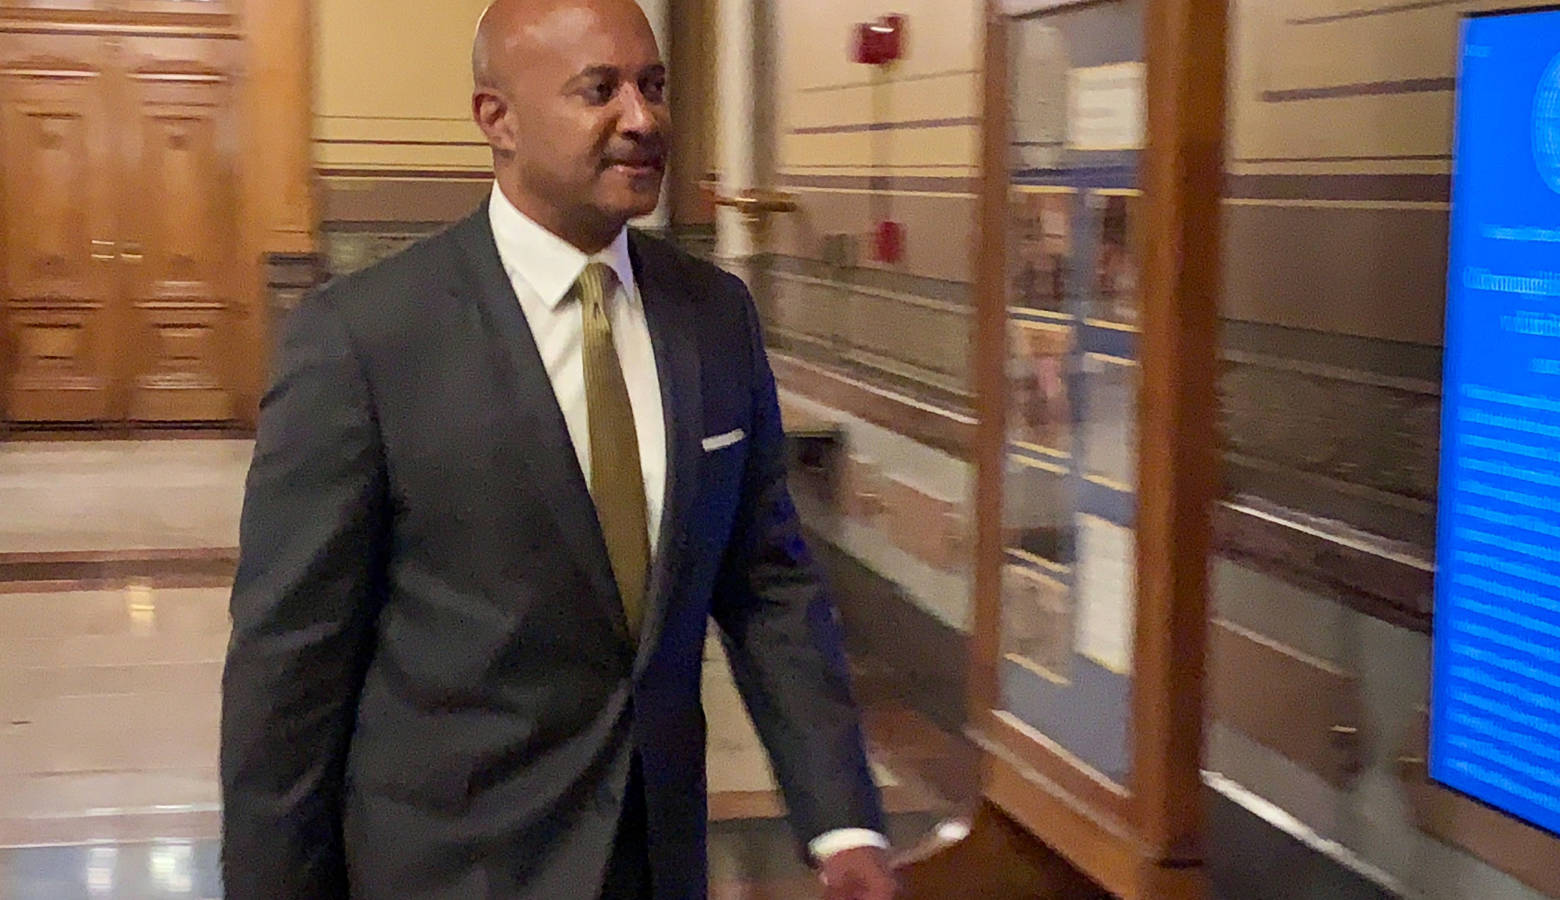 Attorney General Curtis Hill walks into the Indiana Supreme Court courtroom during the second day of his attorney disciplinary hearing. (Brandon Smith/IPB News)